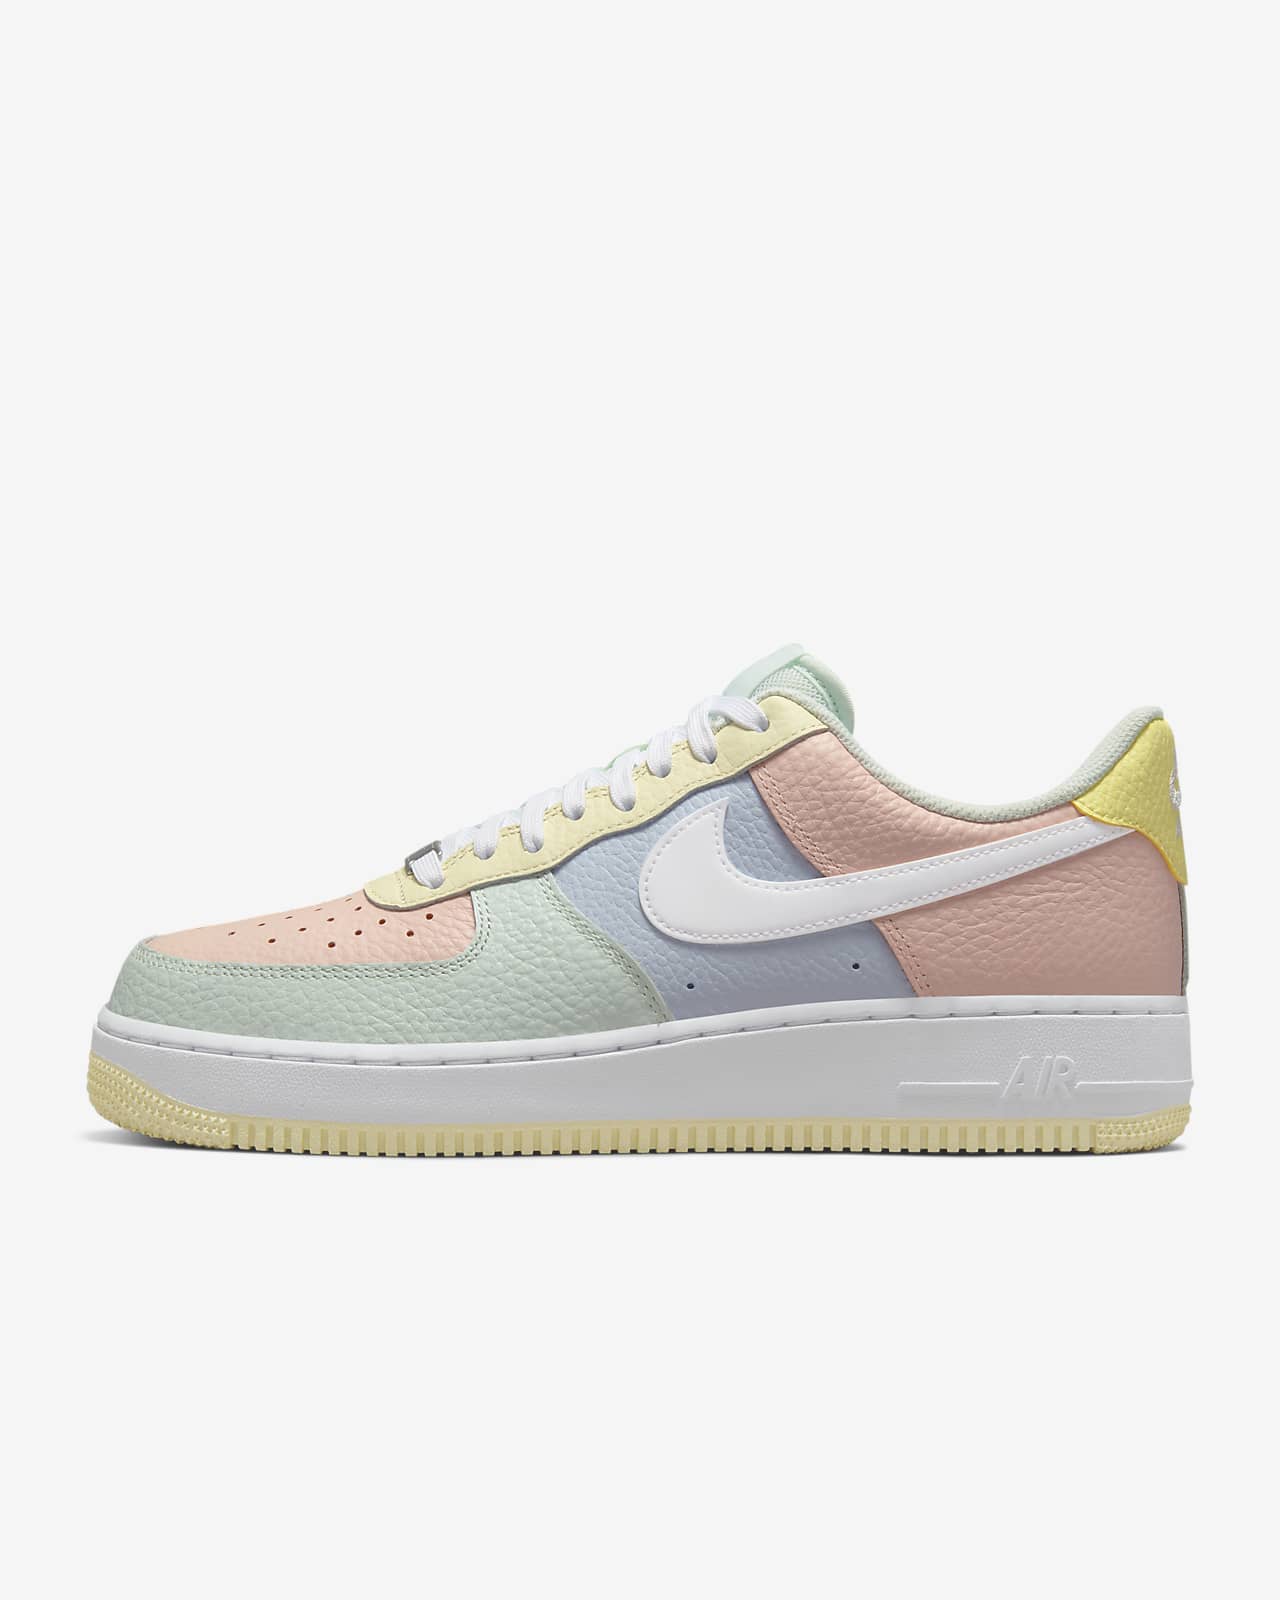 Nike Air Force air force 1 07 1 '07 SN Men's Shoes